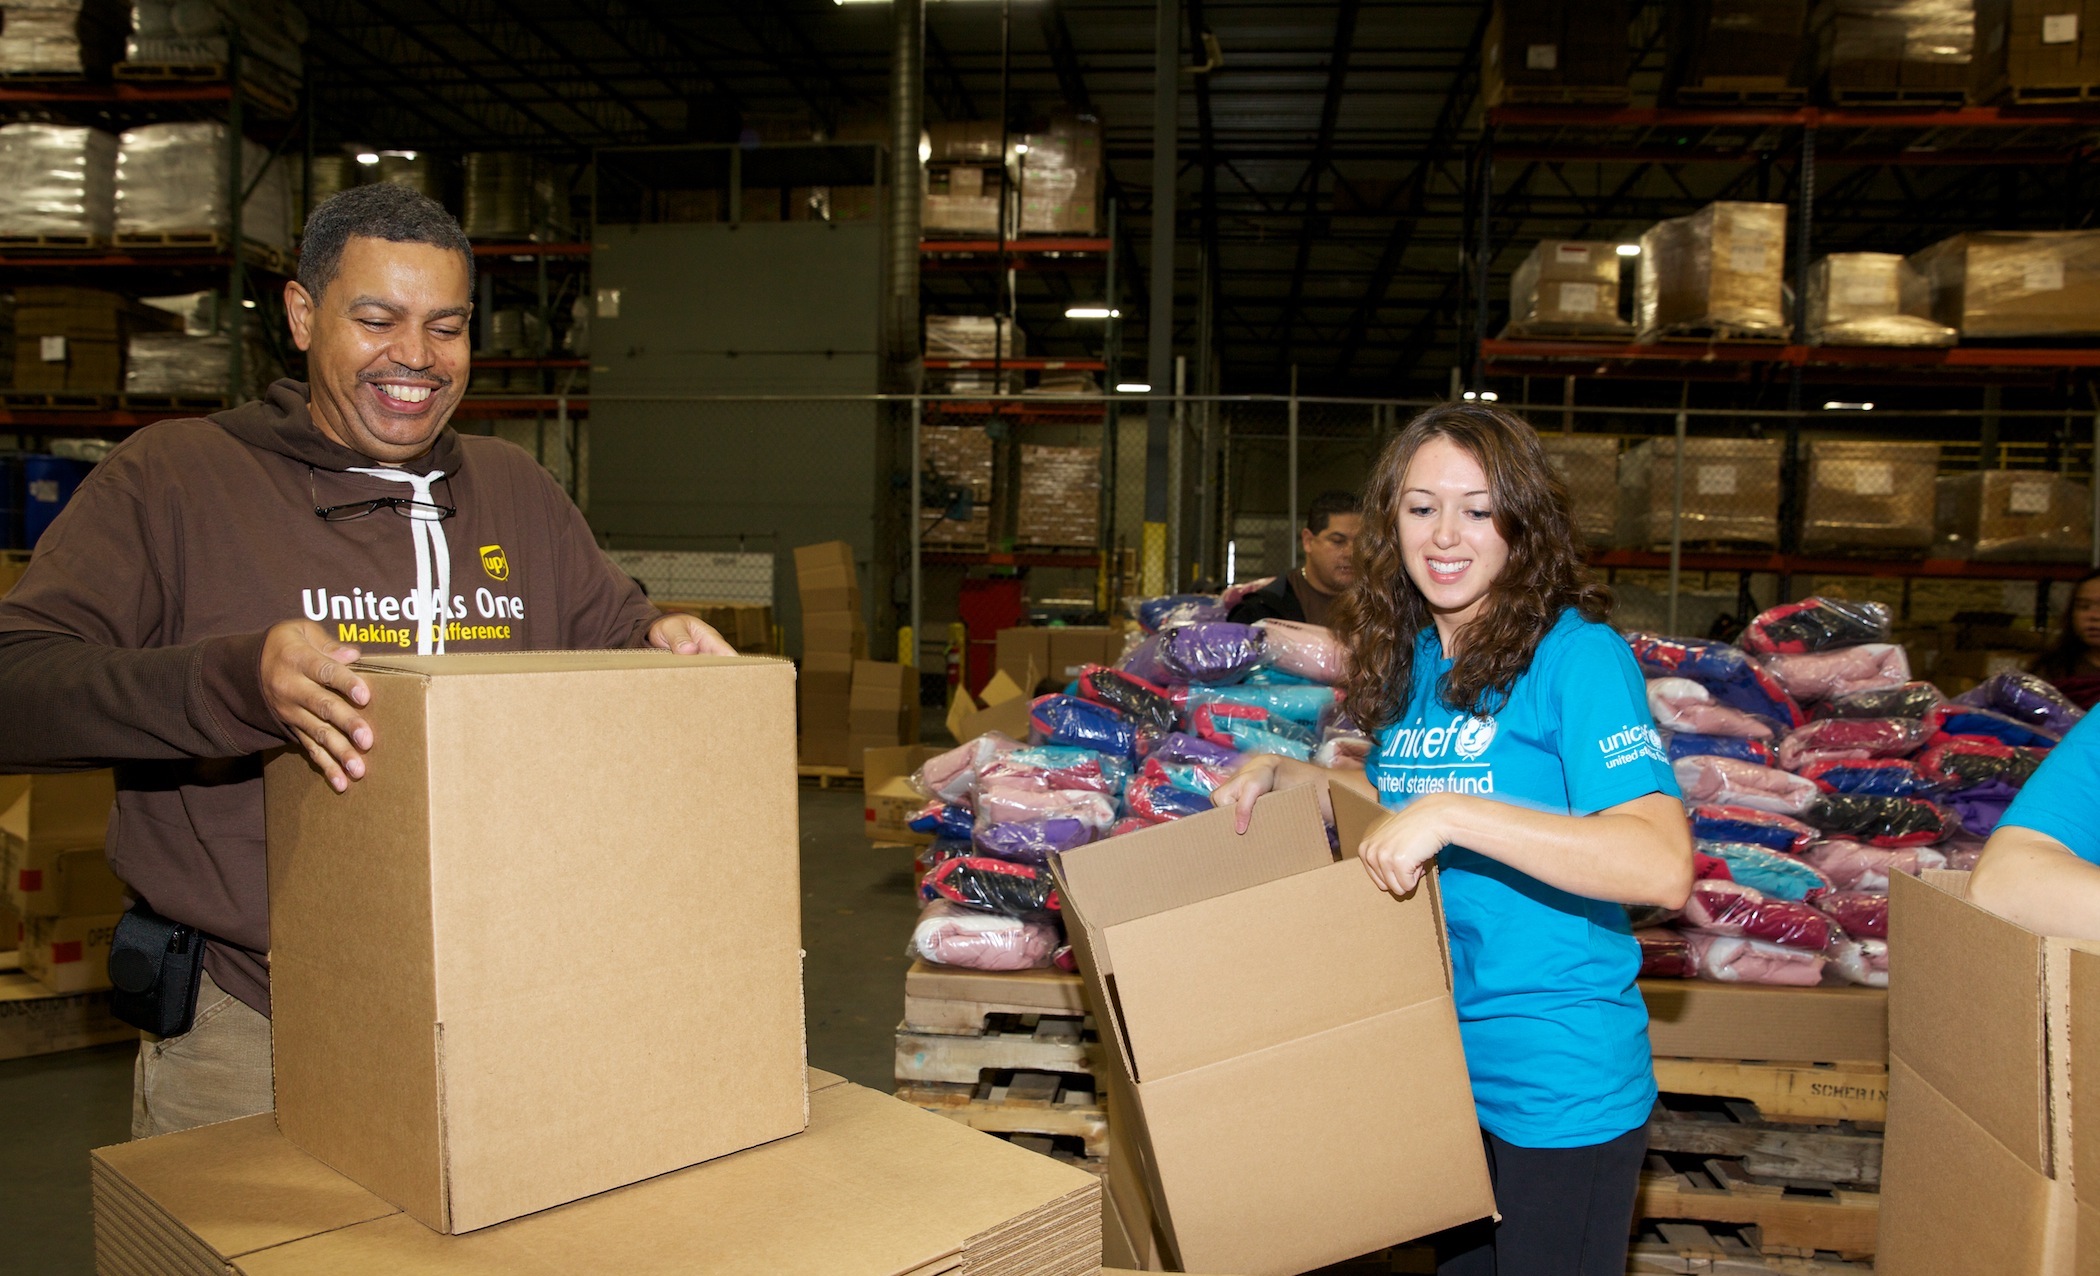 UPS employees joined UNICEF USA volunteers to pack 2,500 kits of warm clothing for Syrian children at a warehouse in Carteret, NJ. ©UNICEF USA/Thelma Garcia for Julie Skarratt Photography. 